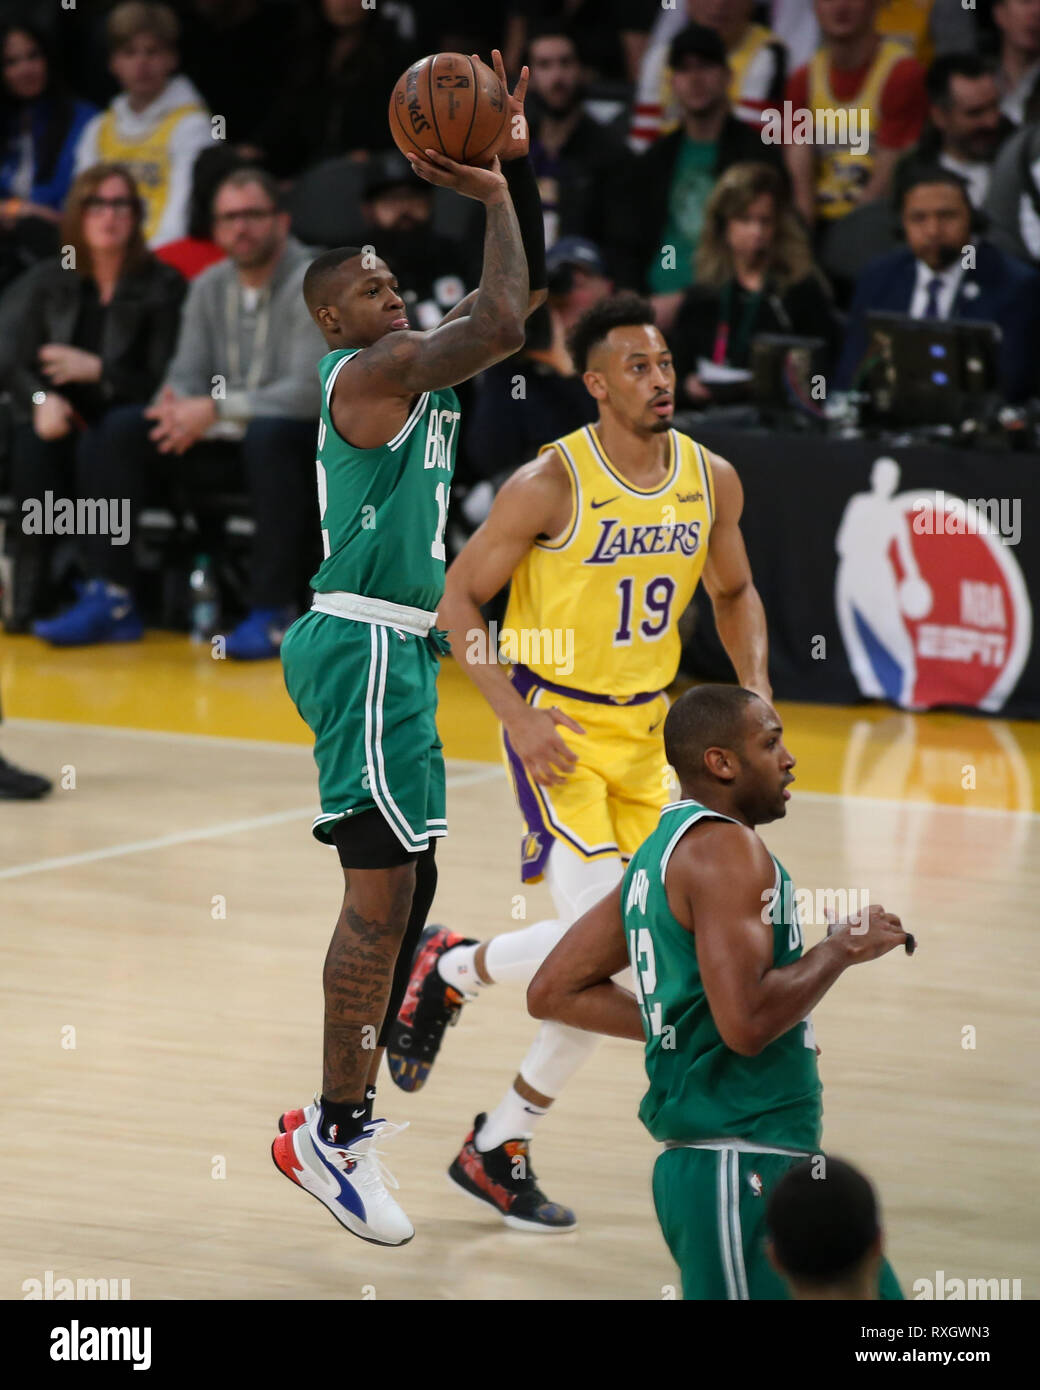 Boston Celtics guard Terry Rozier #12 shooting during the Boston Celtics vs Los Angeles Lakers game at Staples Center in Los Angeles, CA on March 09, 2019. (Photo by Jevone Moore) Stock Photo